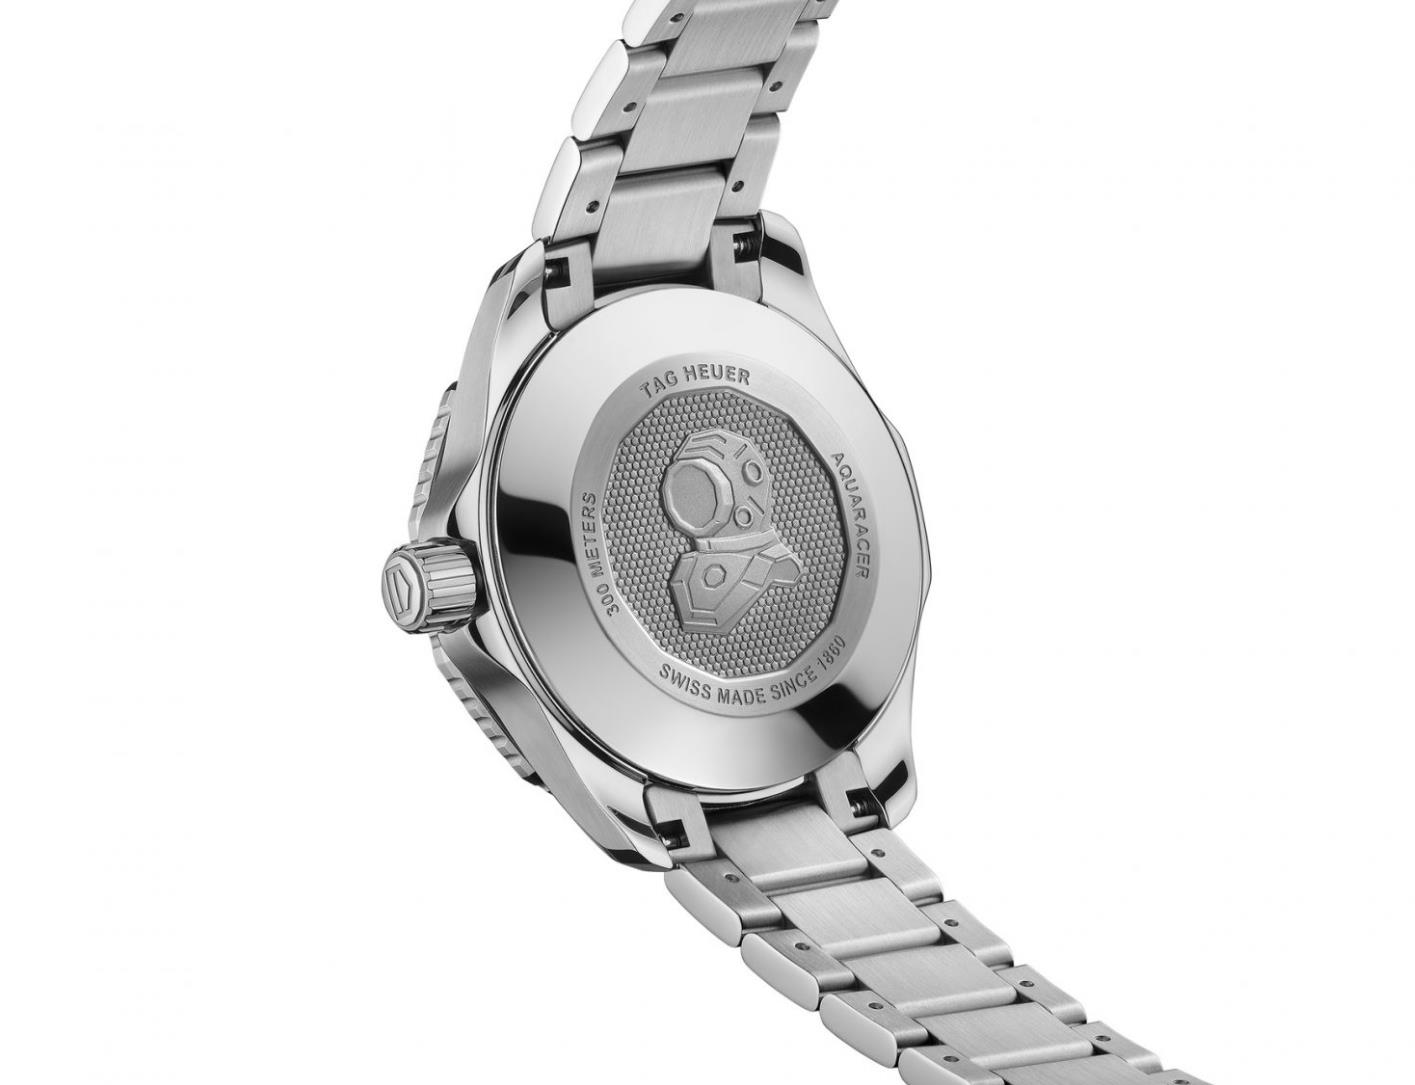 The Swiss made fake watch is designed for women.